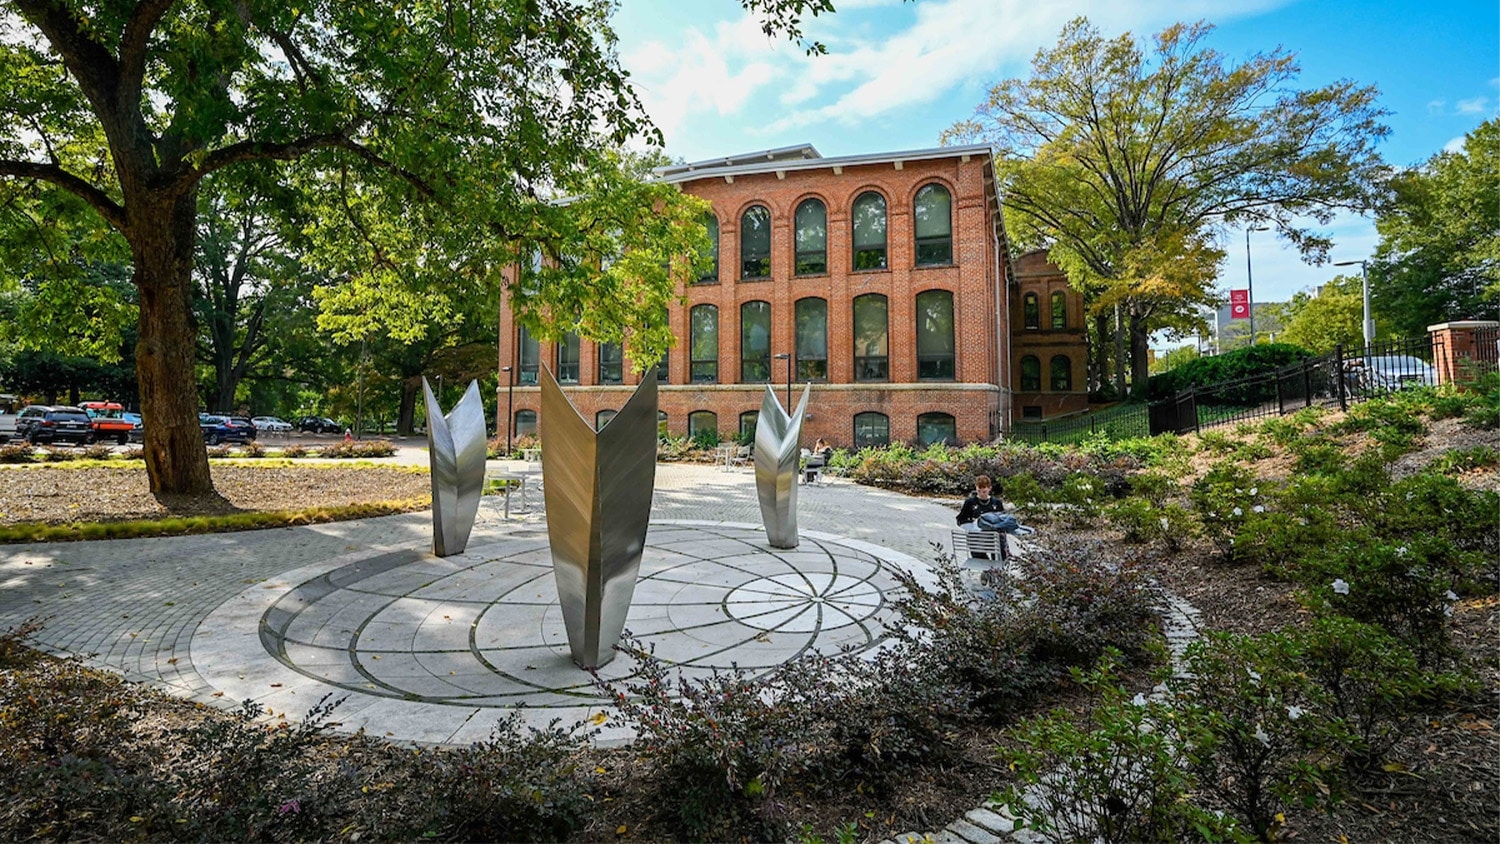 NC State's Global Courtyard includes an art installation that resembles a globe